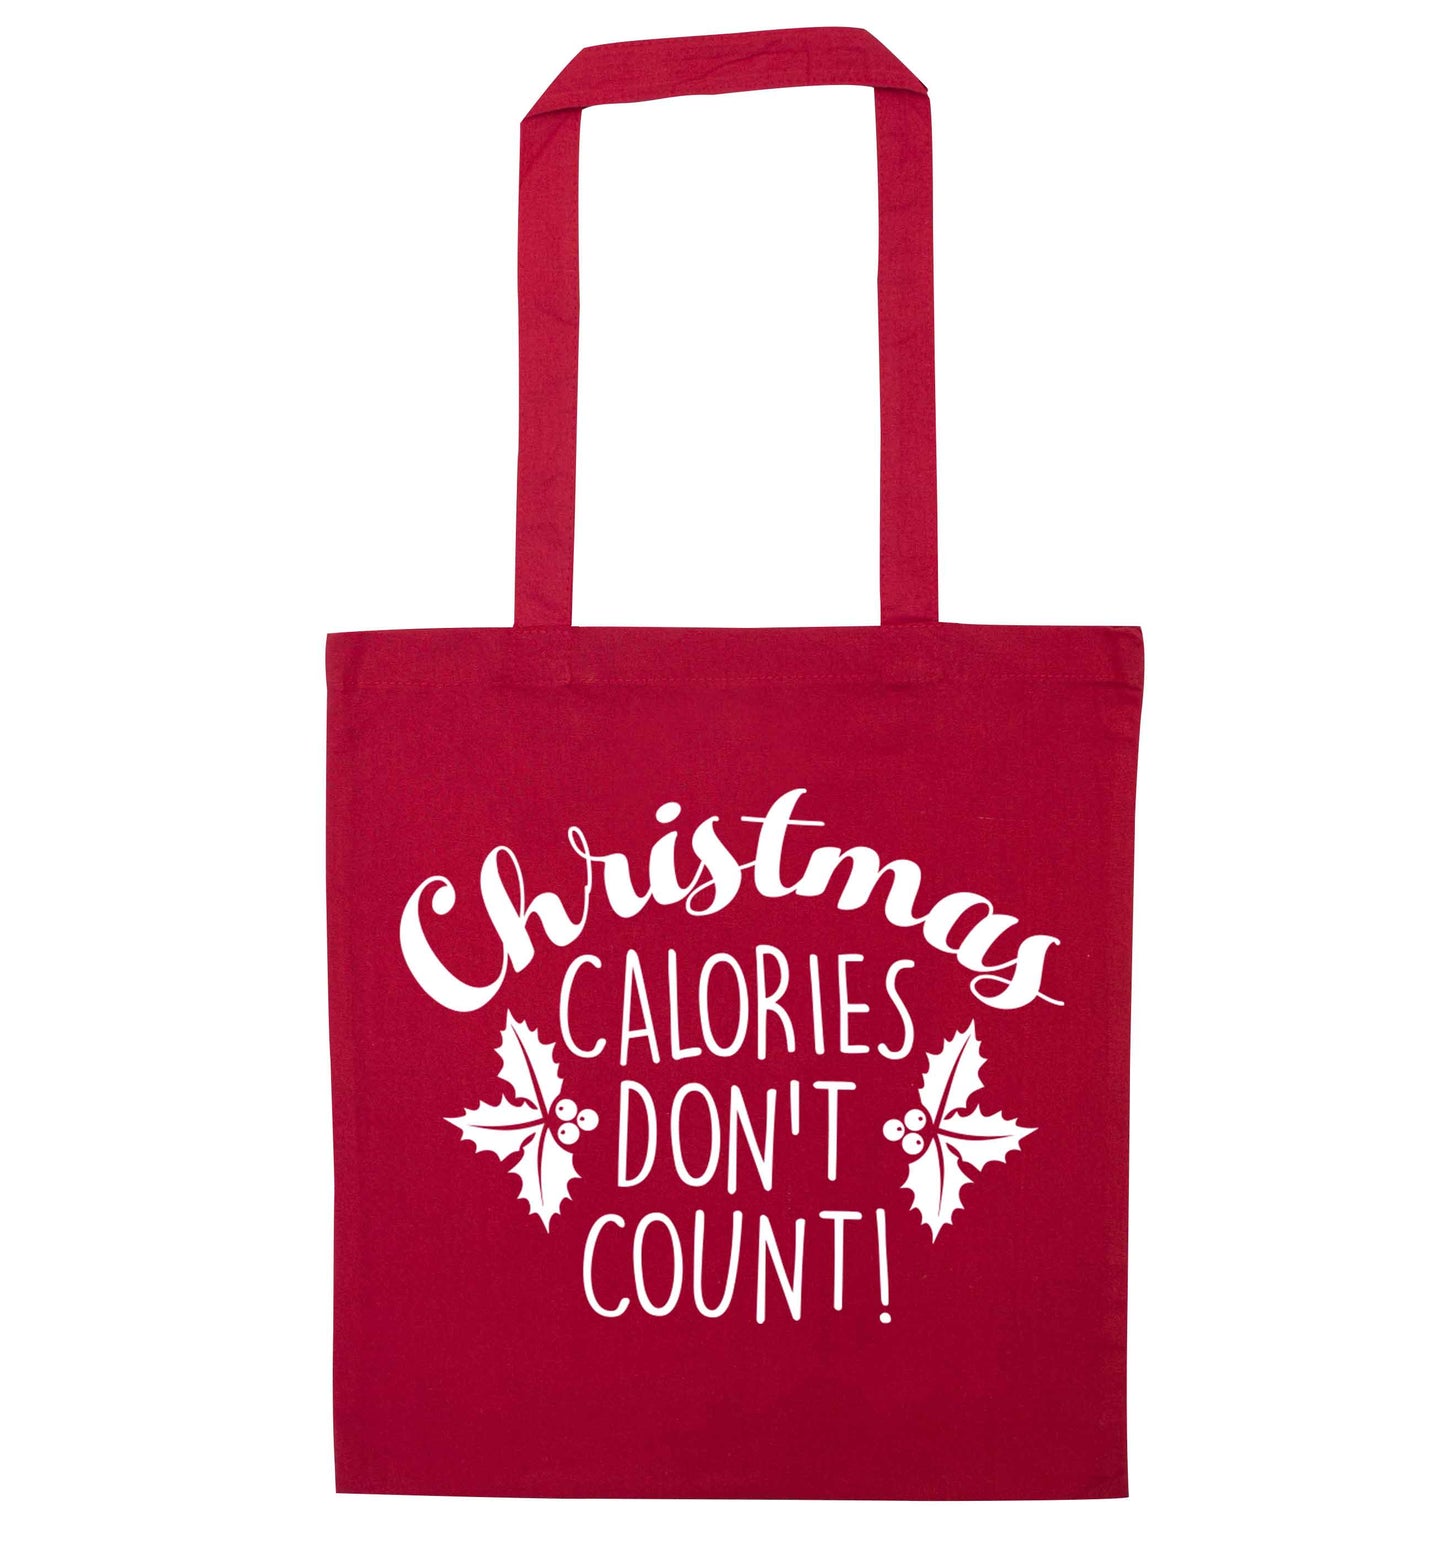 Christmas calories don't count red tote bag